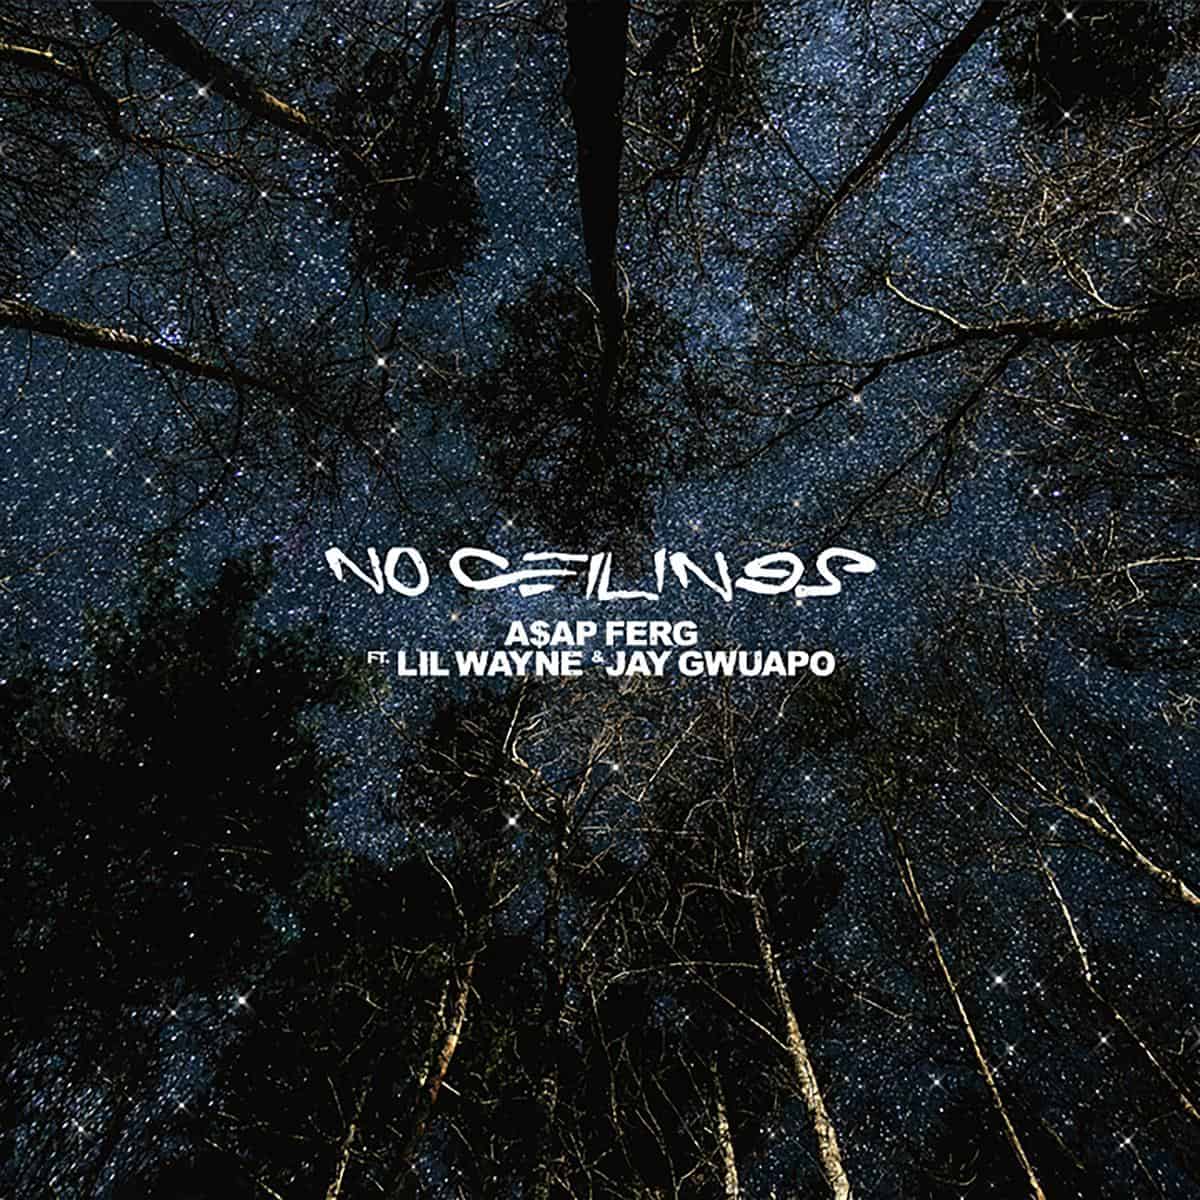 ASAP Ferg Releases No Ceilings Feat. Lil Wayne & Jay Gwuapo